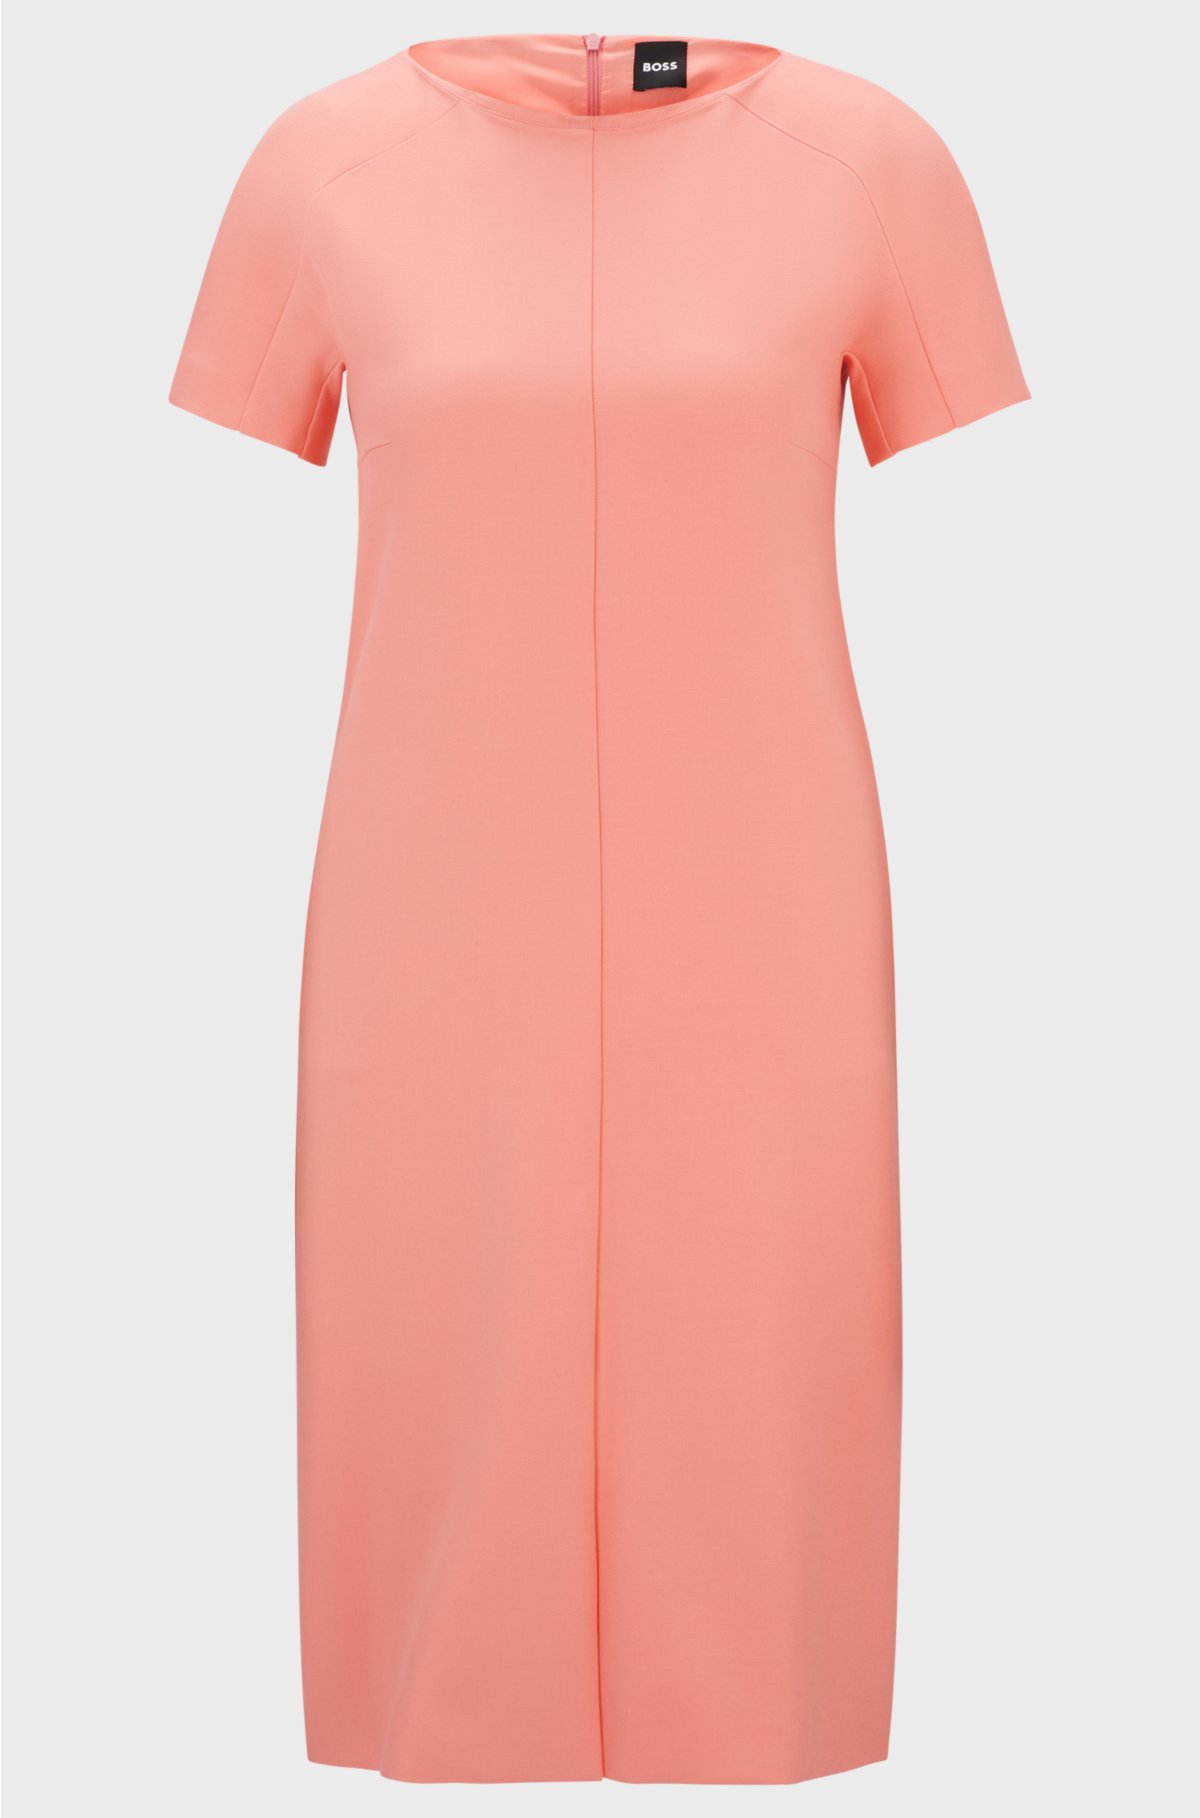 Short-sleeved dress in stretch material, Coral